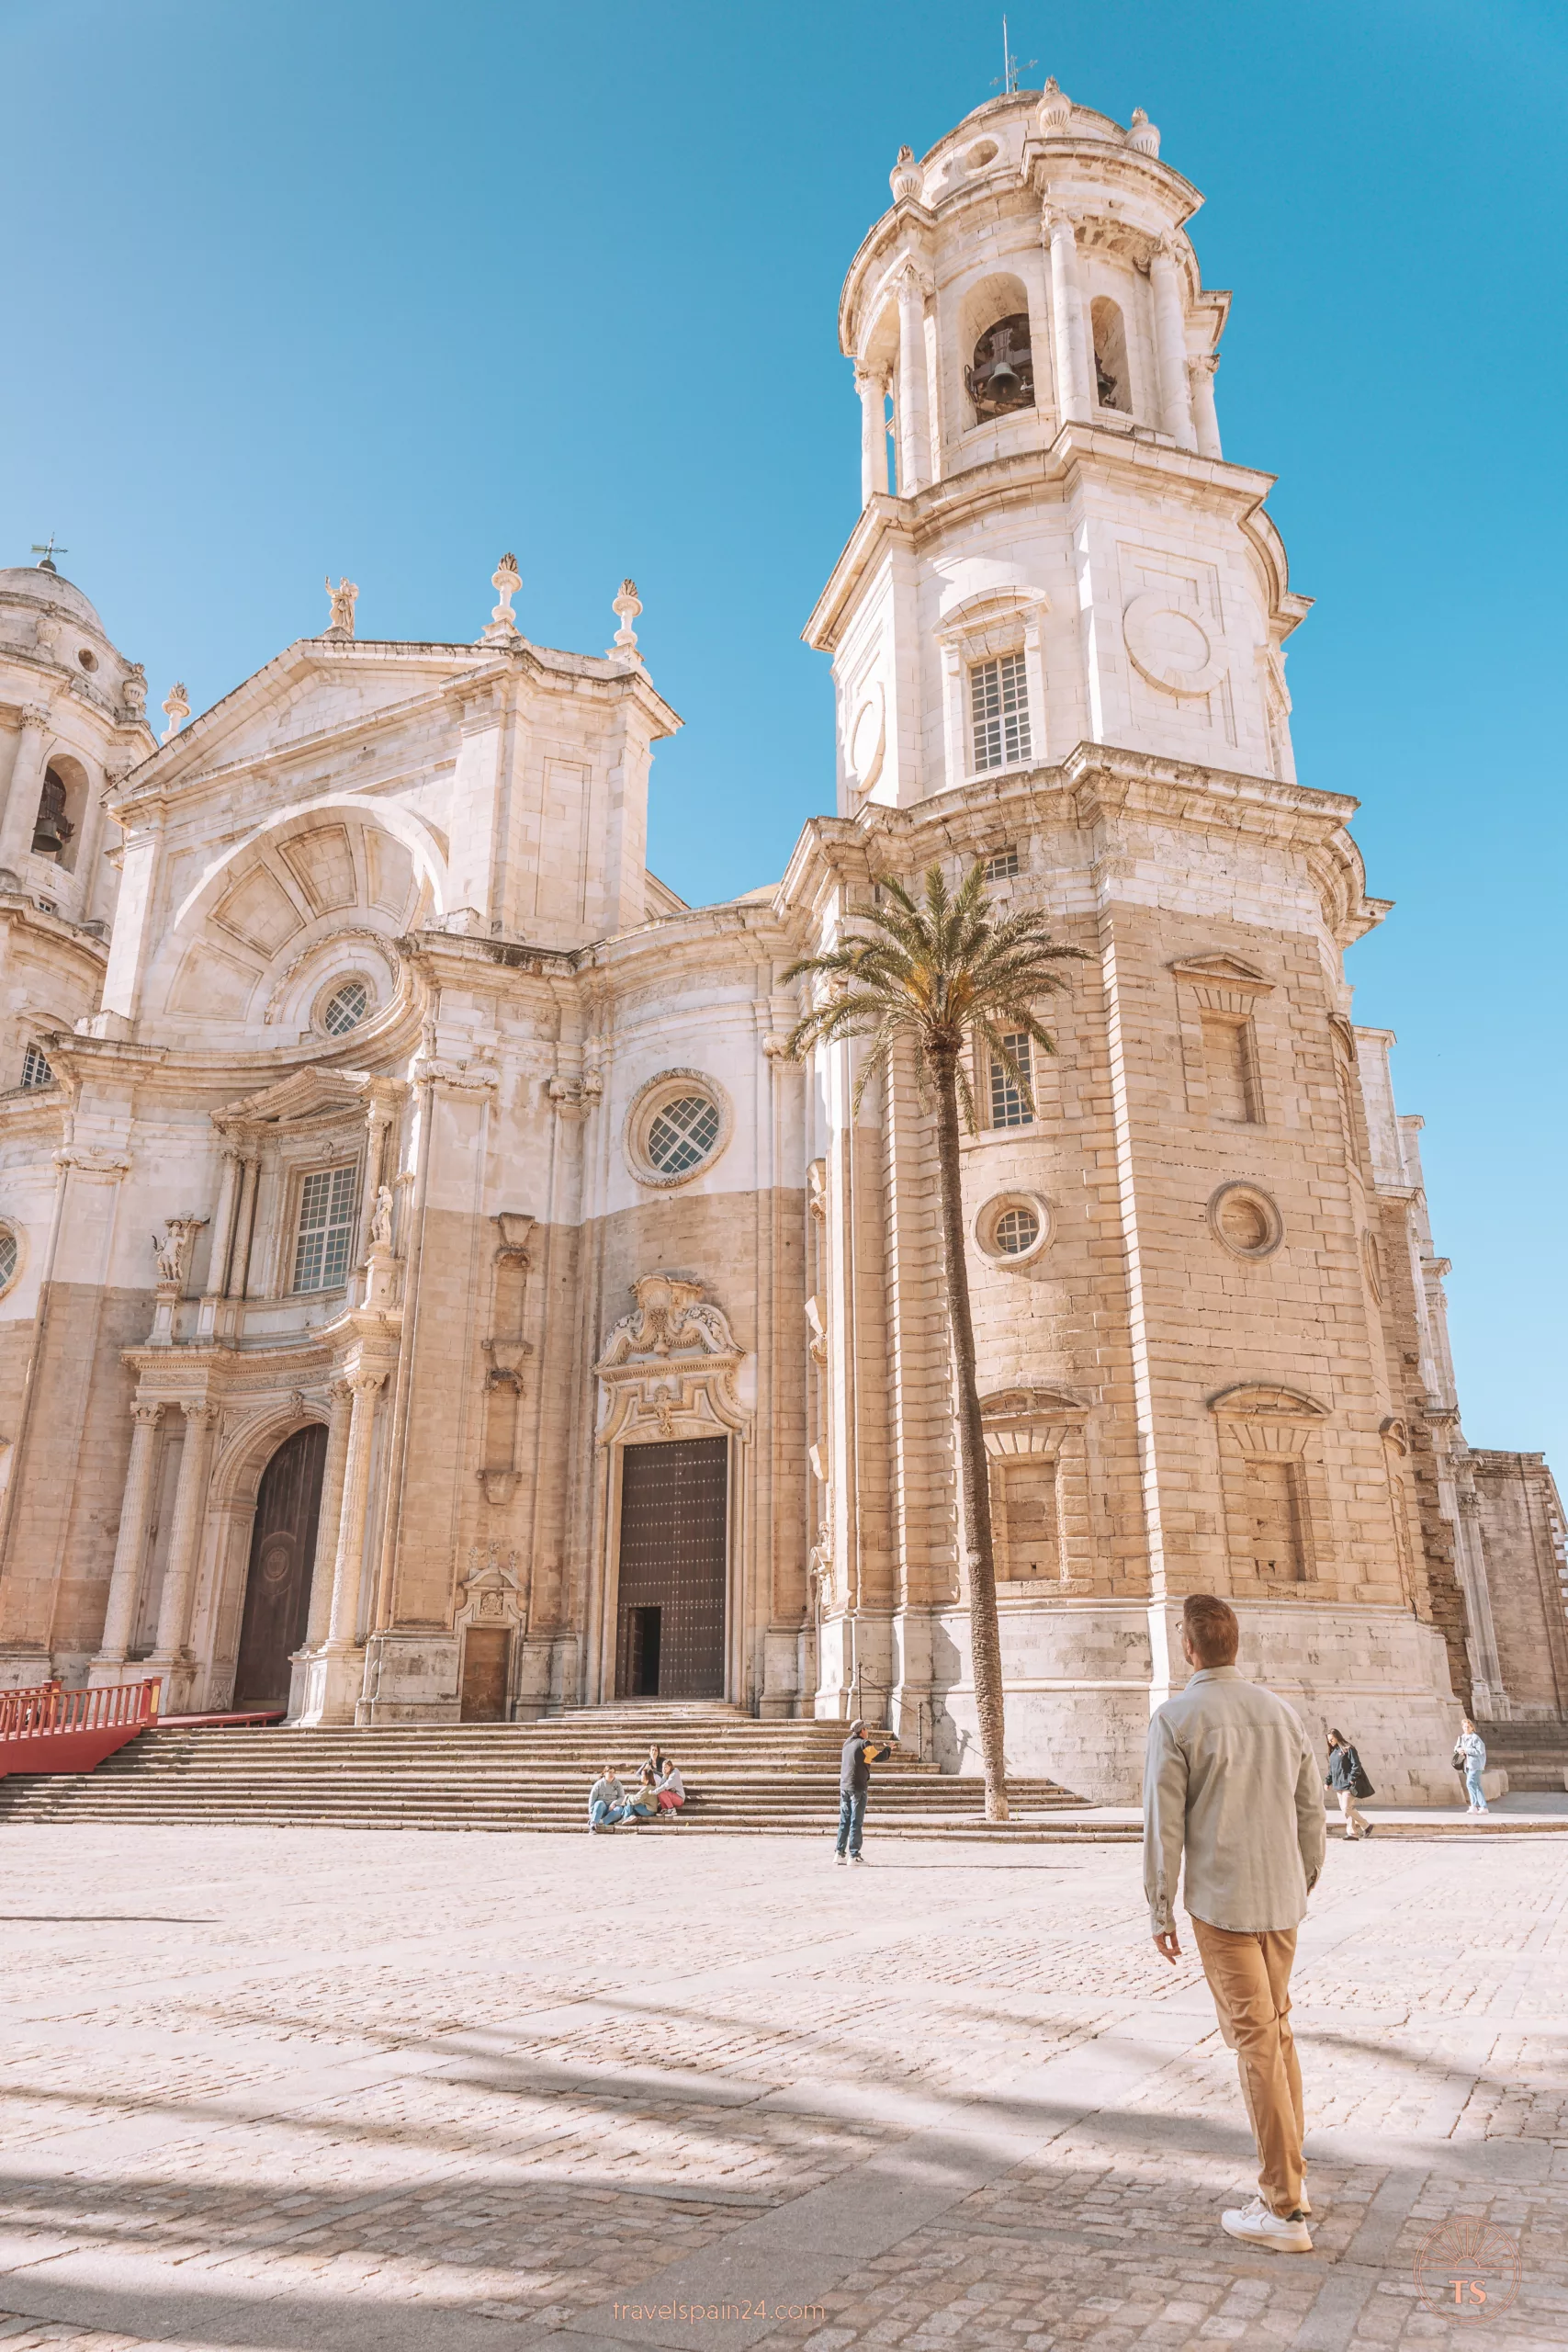 Timon van Basten standing in front of the Cádiz Cathedral facade, with people seated on the stairs, illustrating a popular stop on a Cádiz sightseeing tour.